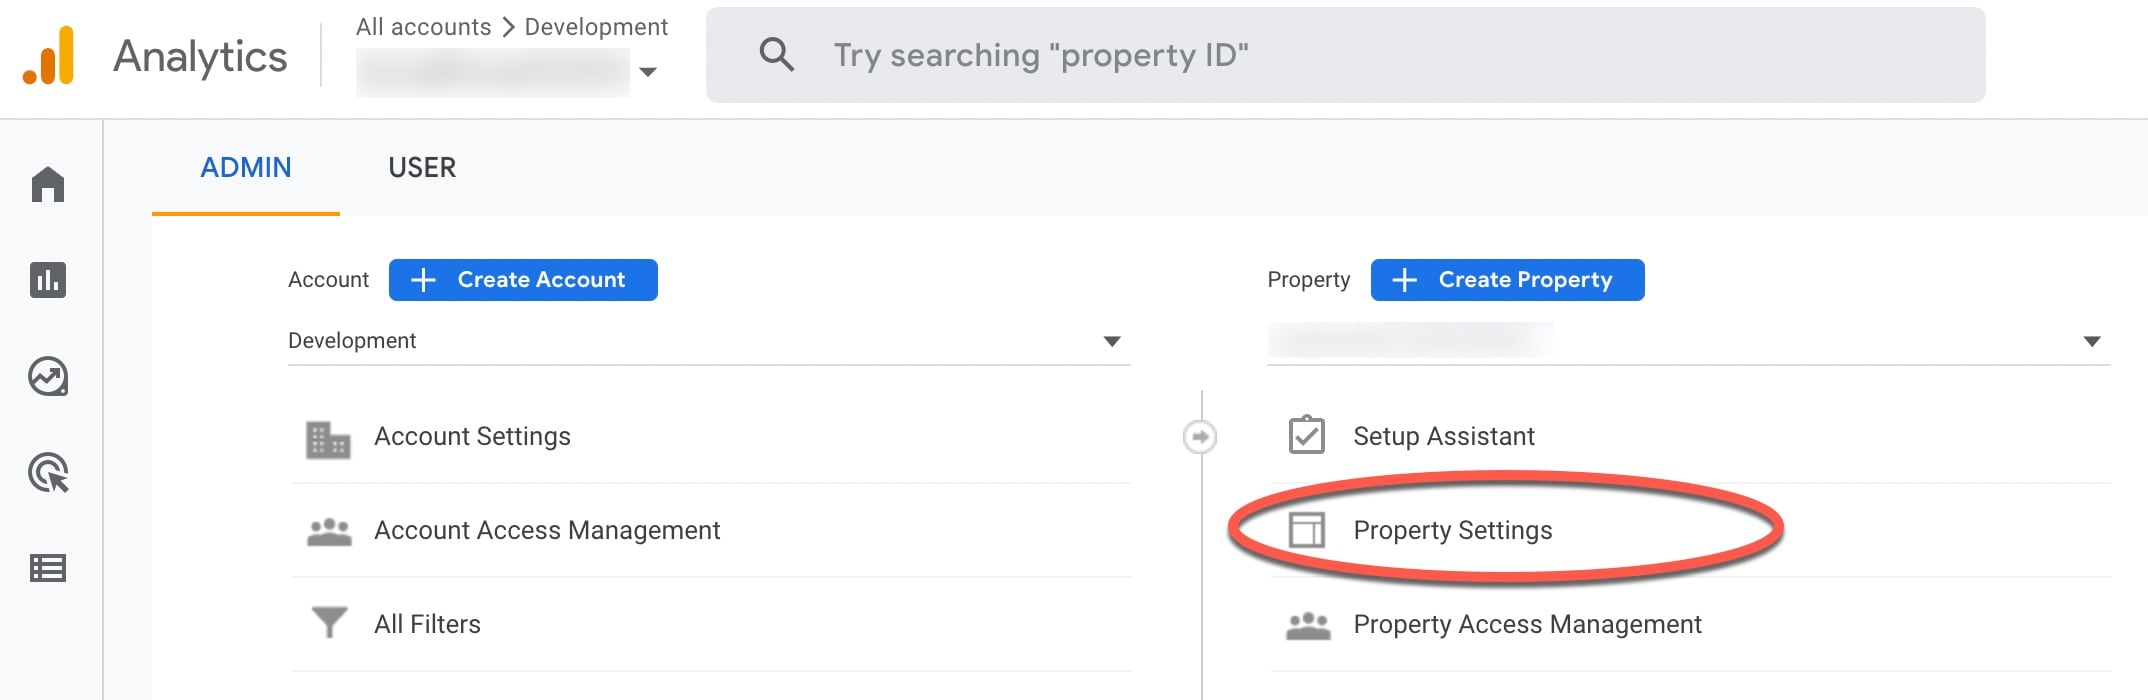 Add Google Service Account as authorized user to your Google Analytics property